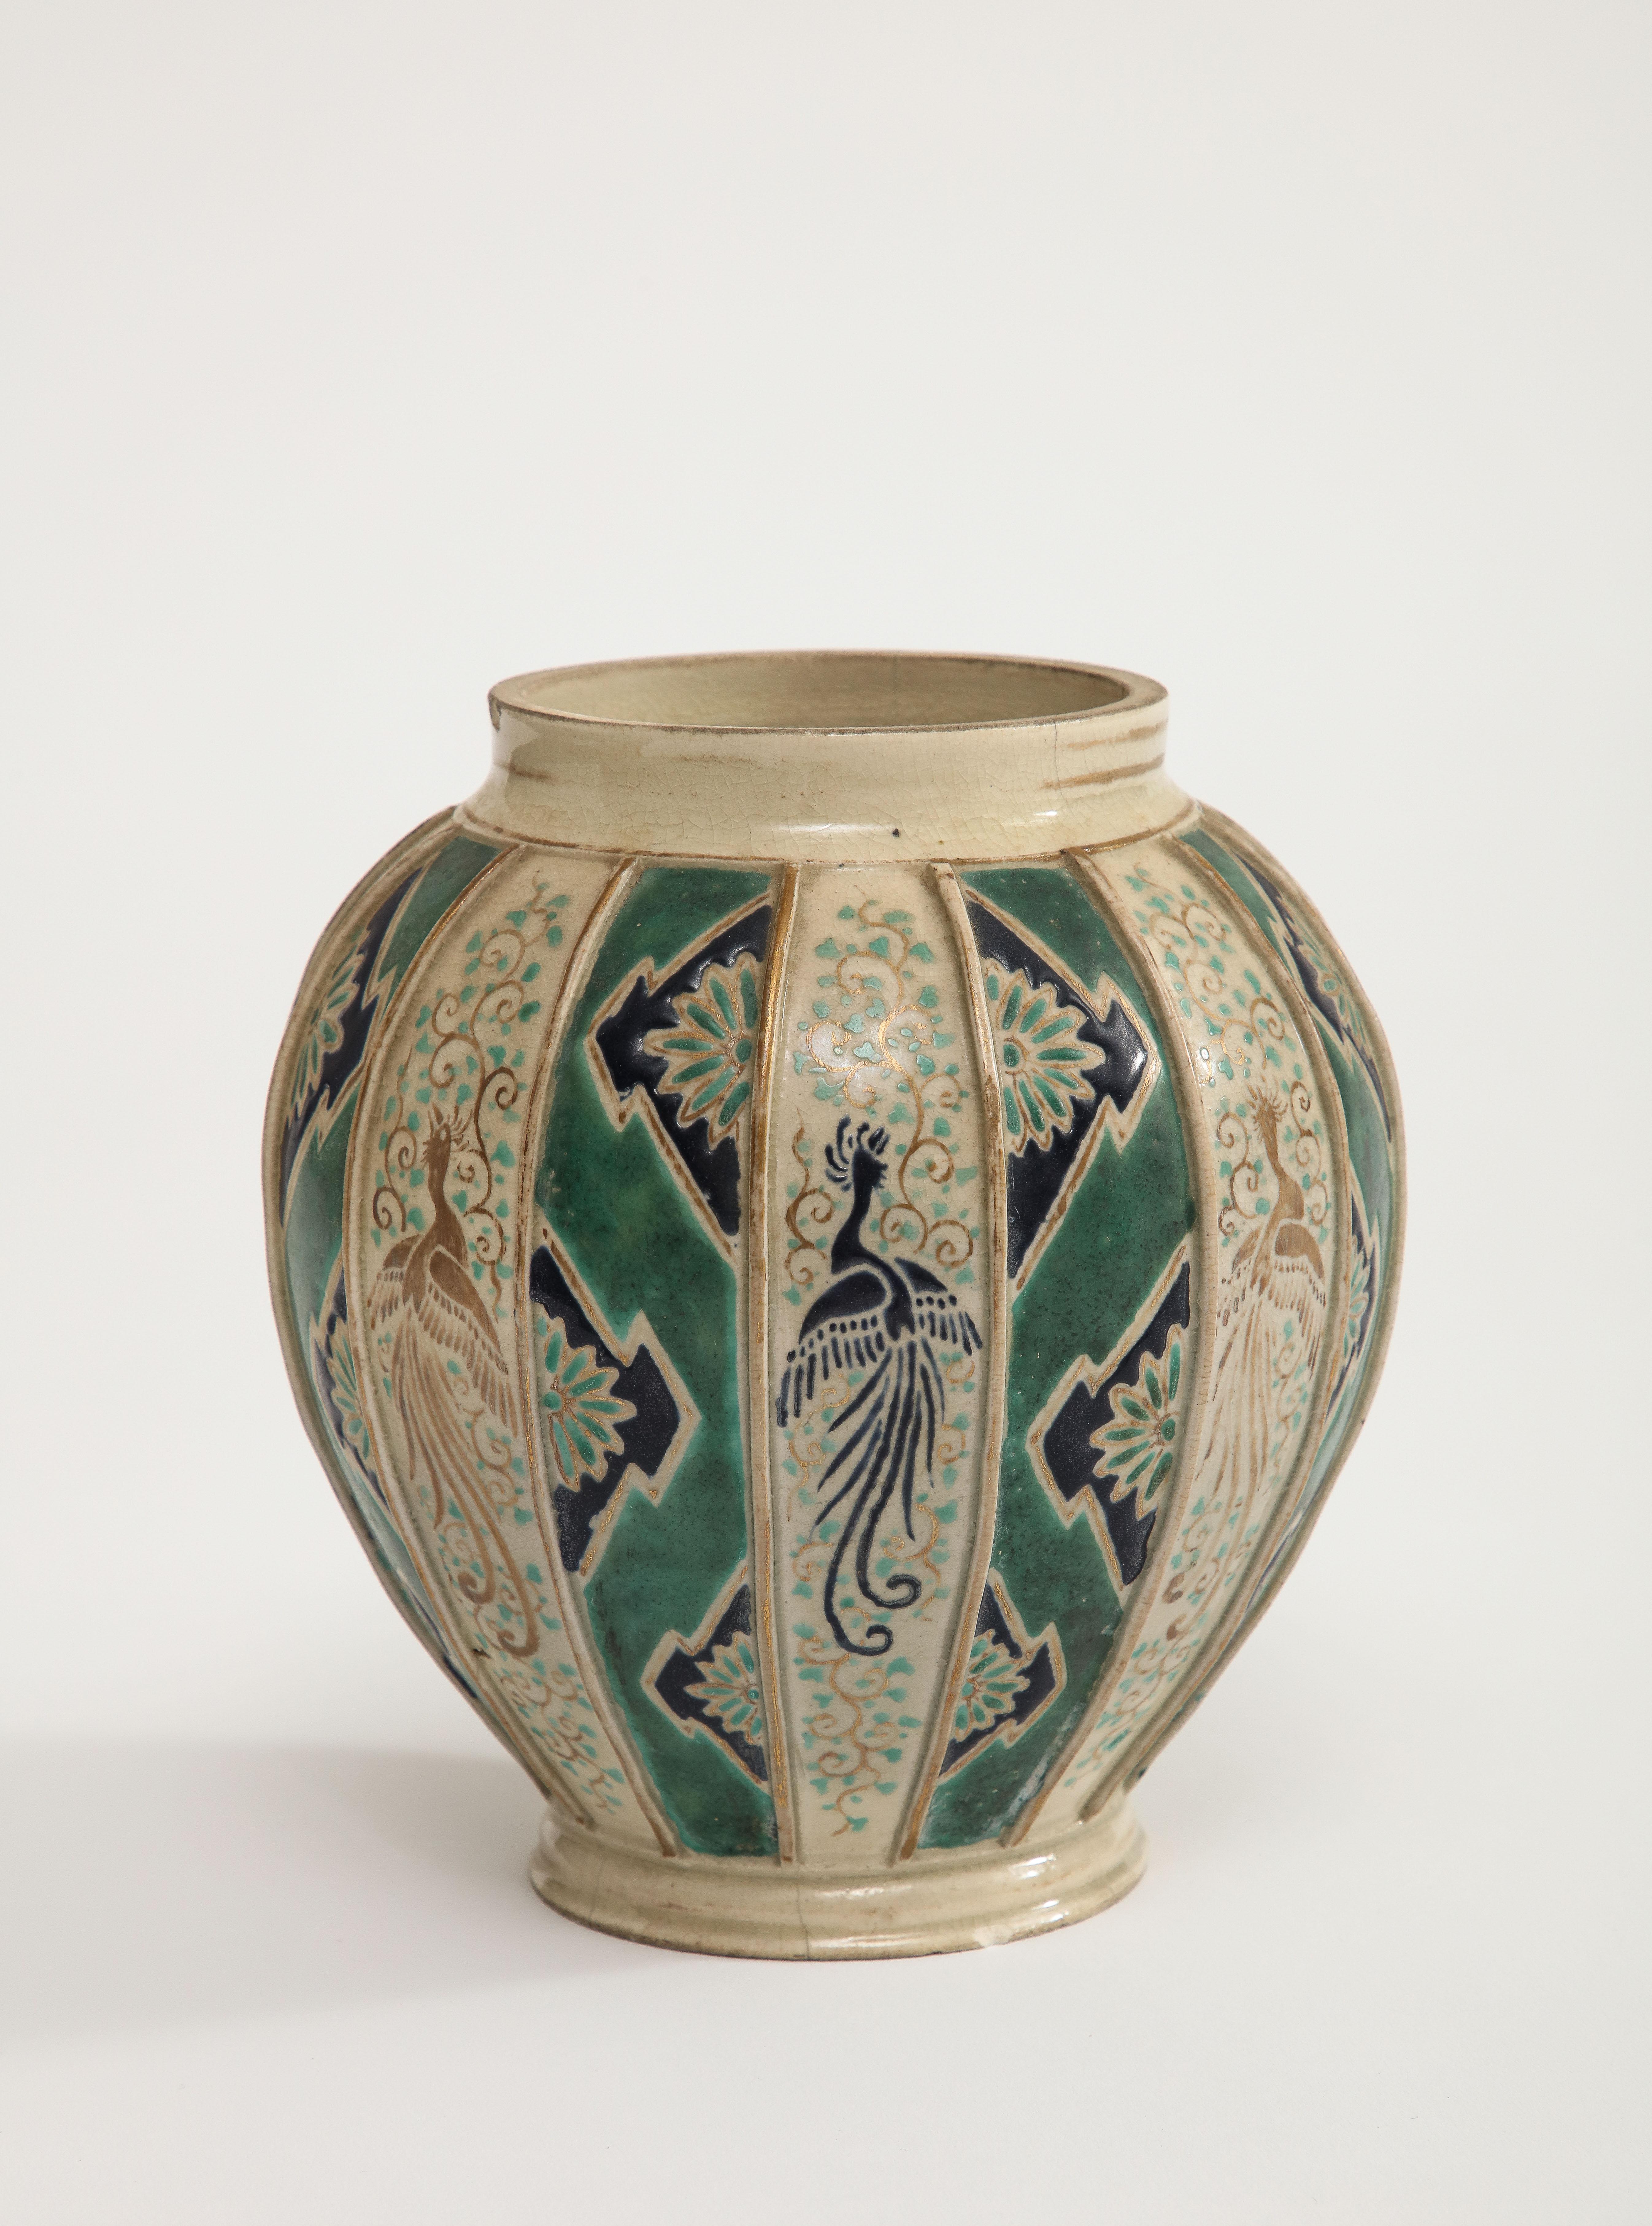 Art Deco pottery vase, hand-painted with birds in flight motif on a natural background alternating with bold green glazed stripes. Germany, 1920s. 